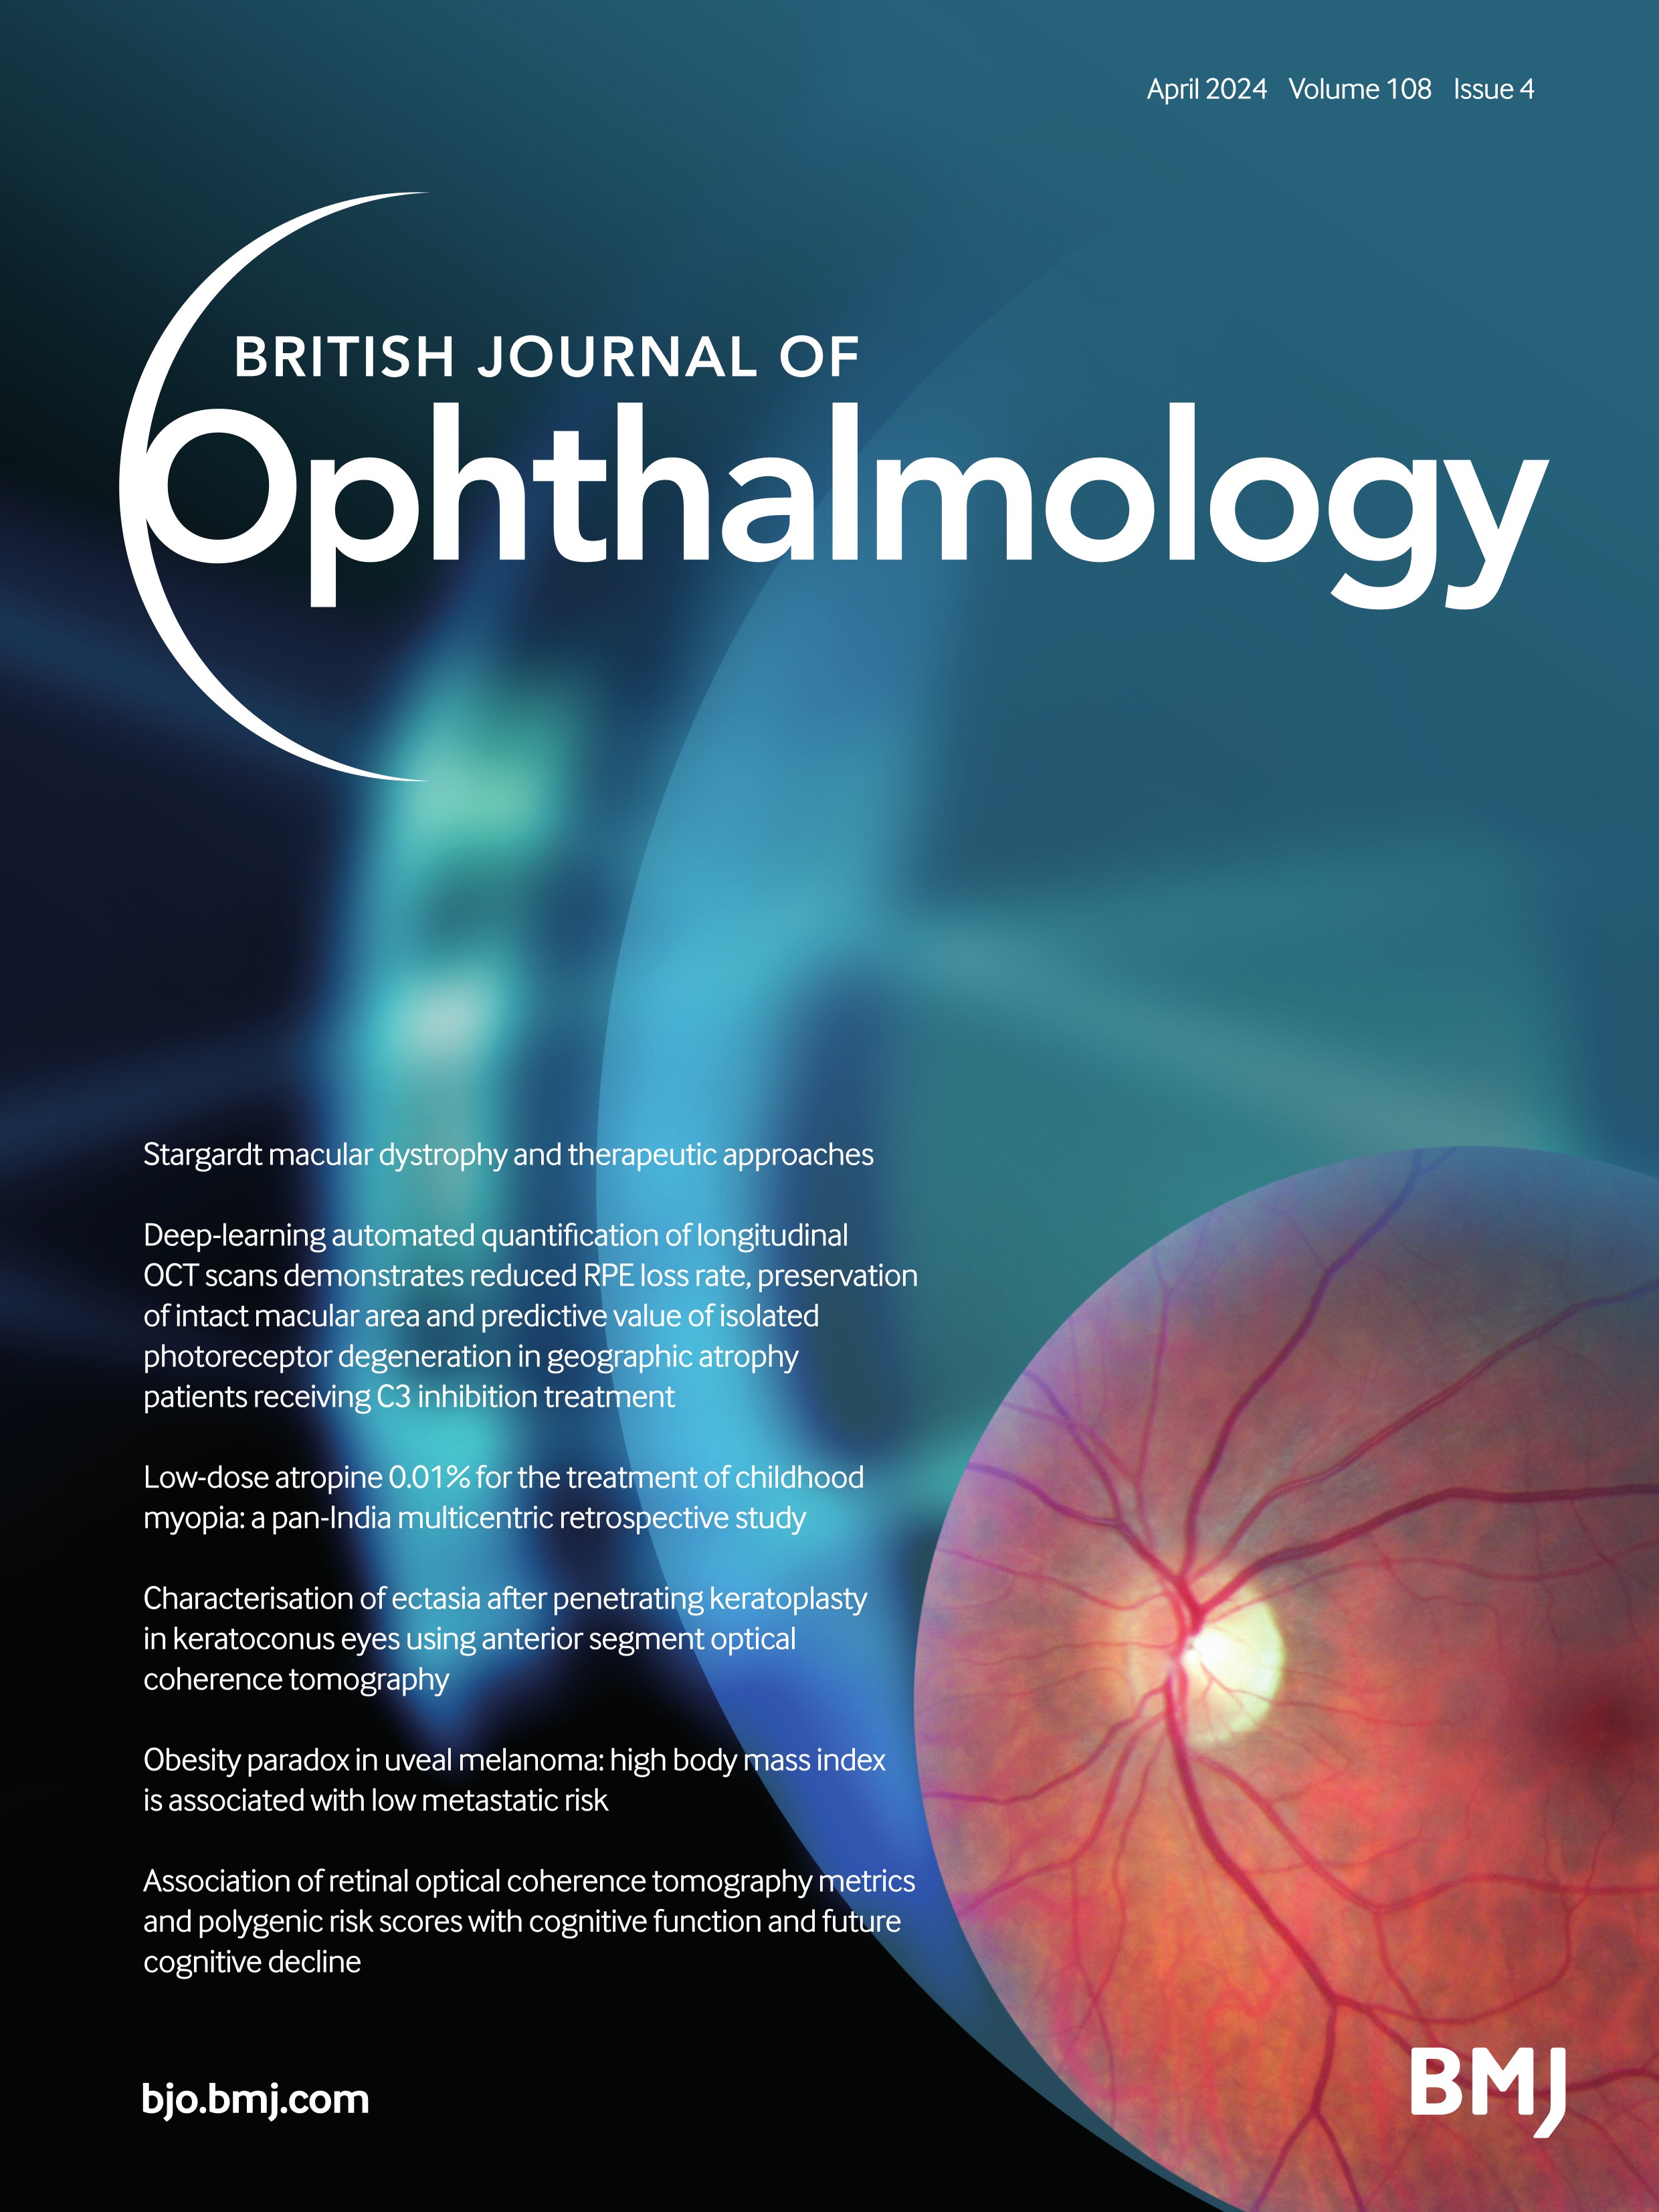 Obesity paradox in uveal melanoma: high body mass index is associated with low metastatic risk